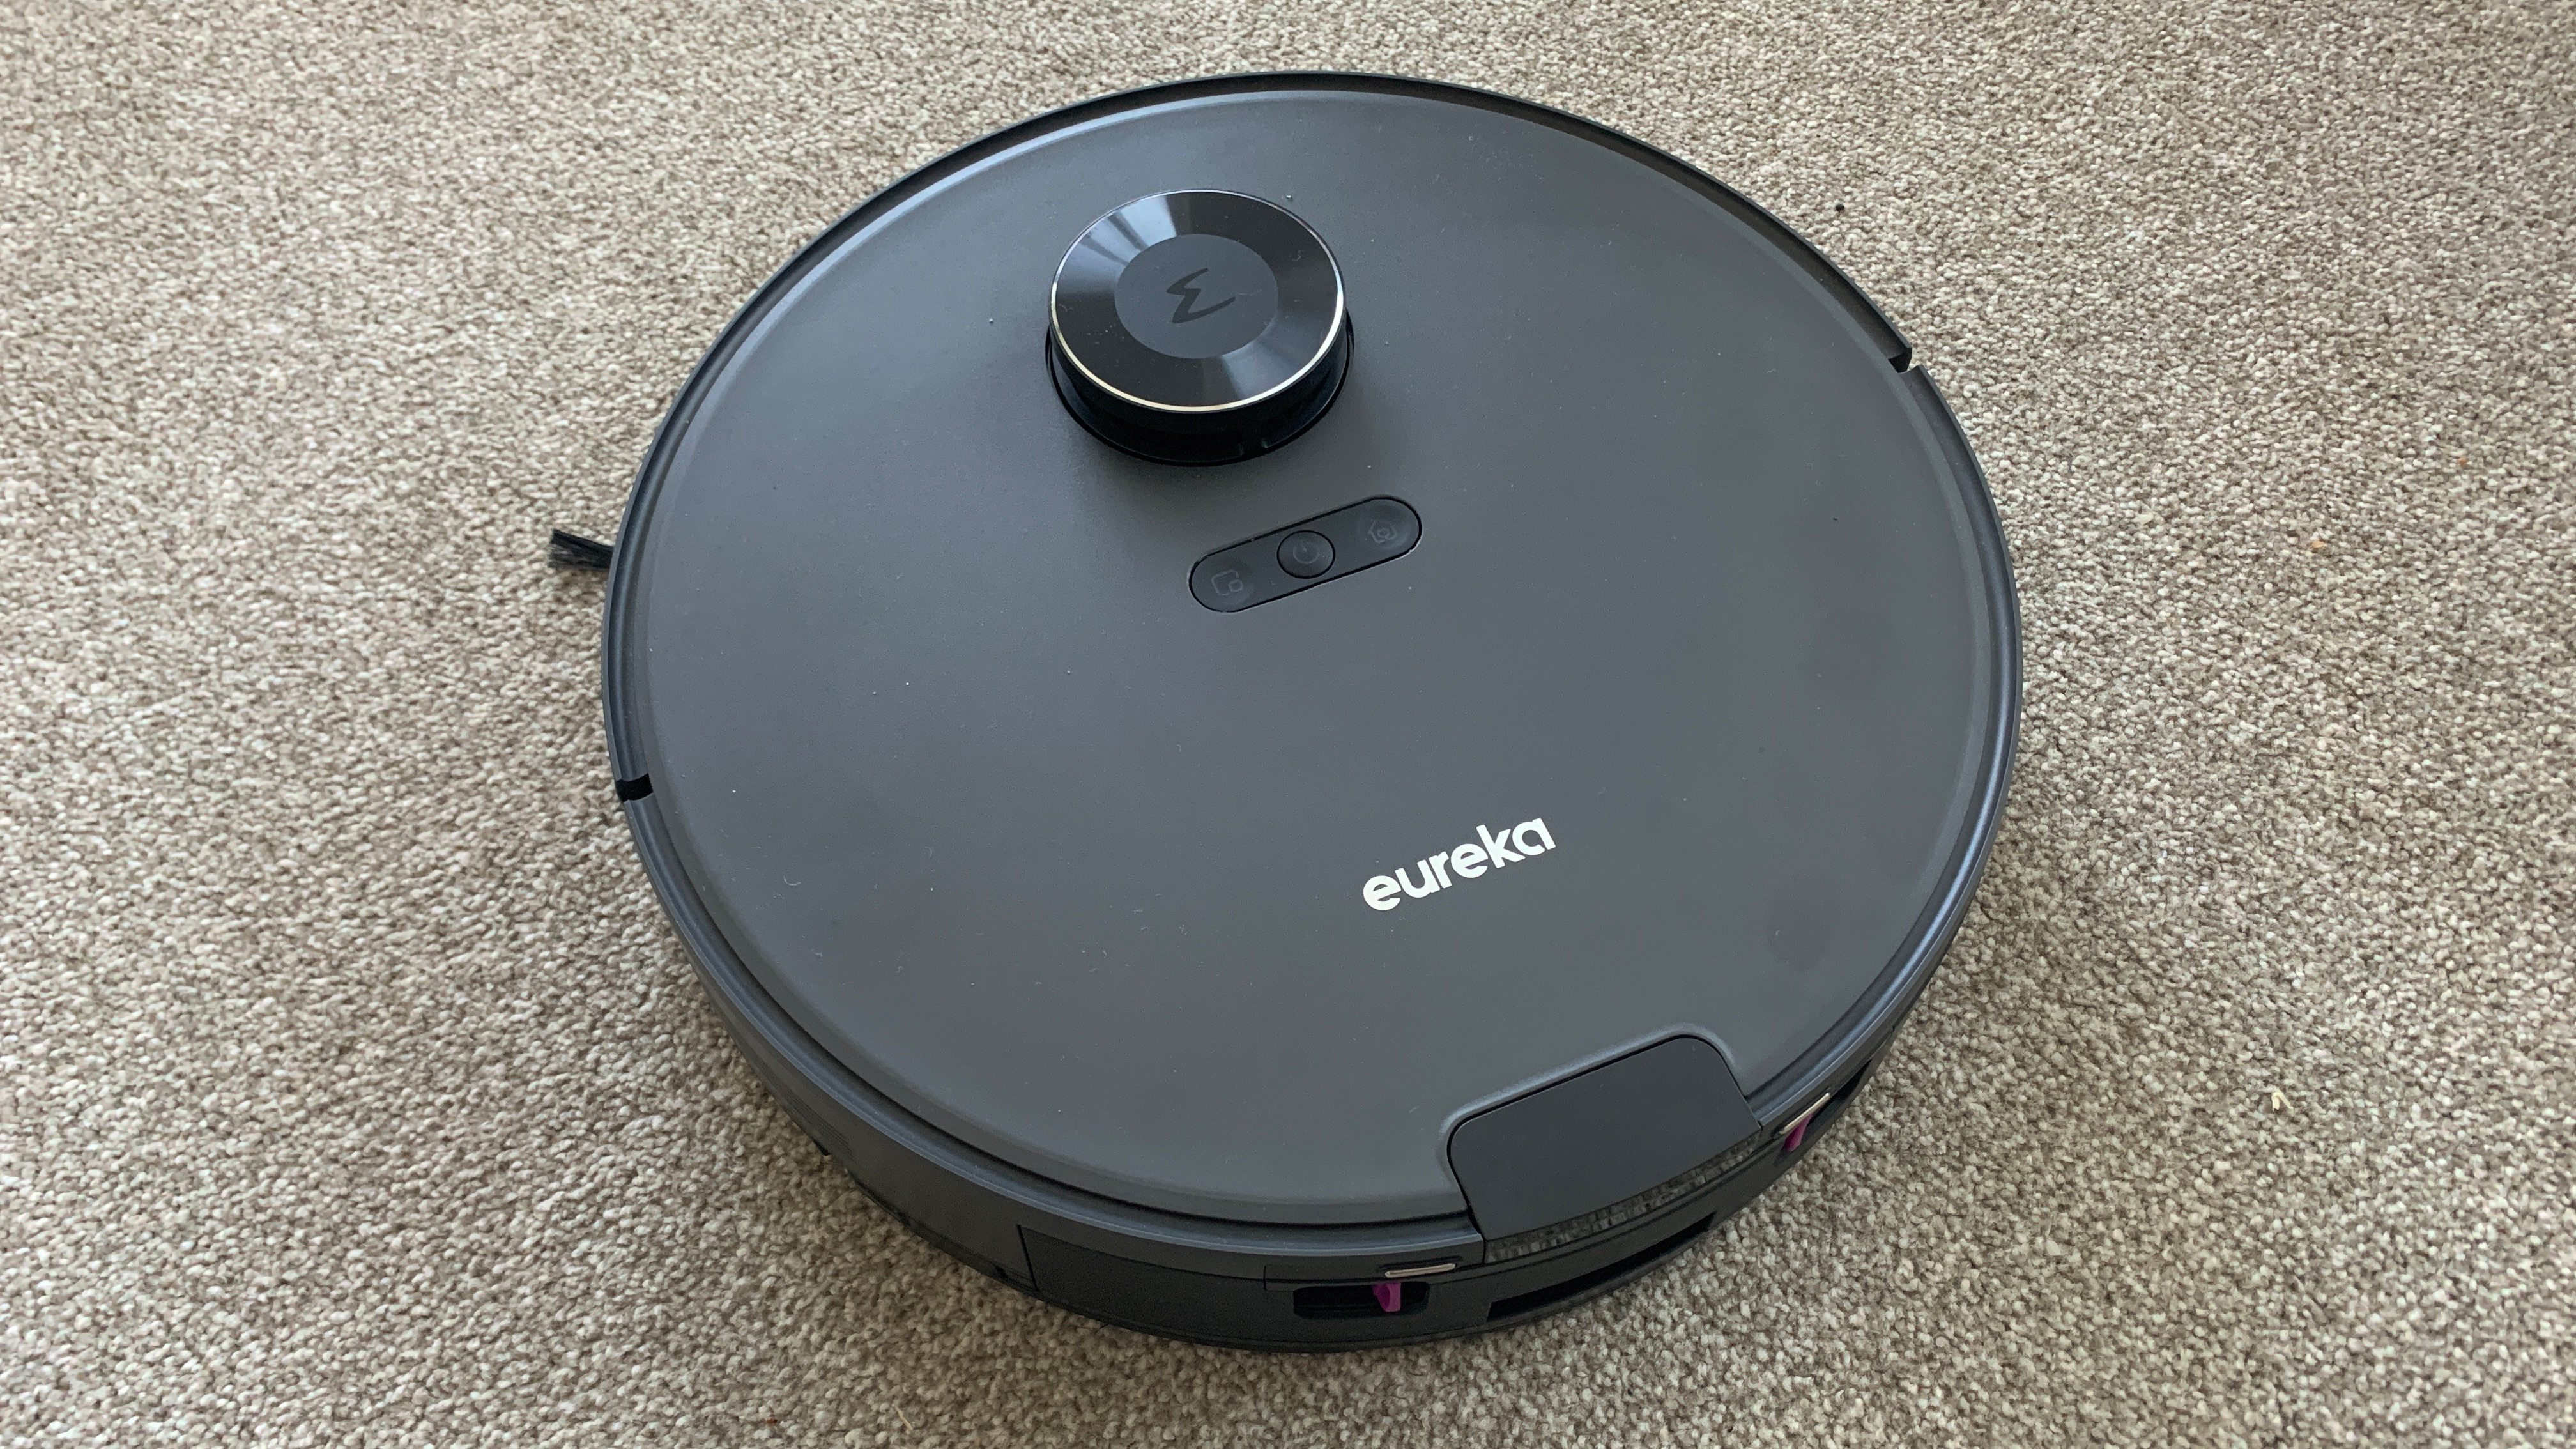 Eureka E10s review: a hybrid vacuum and mop system for everyday cleaning